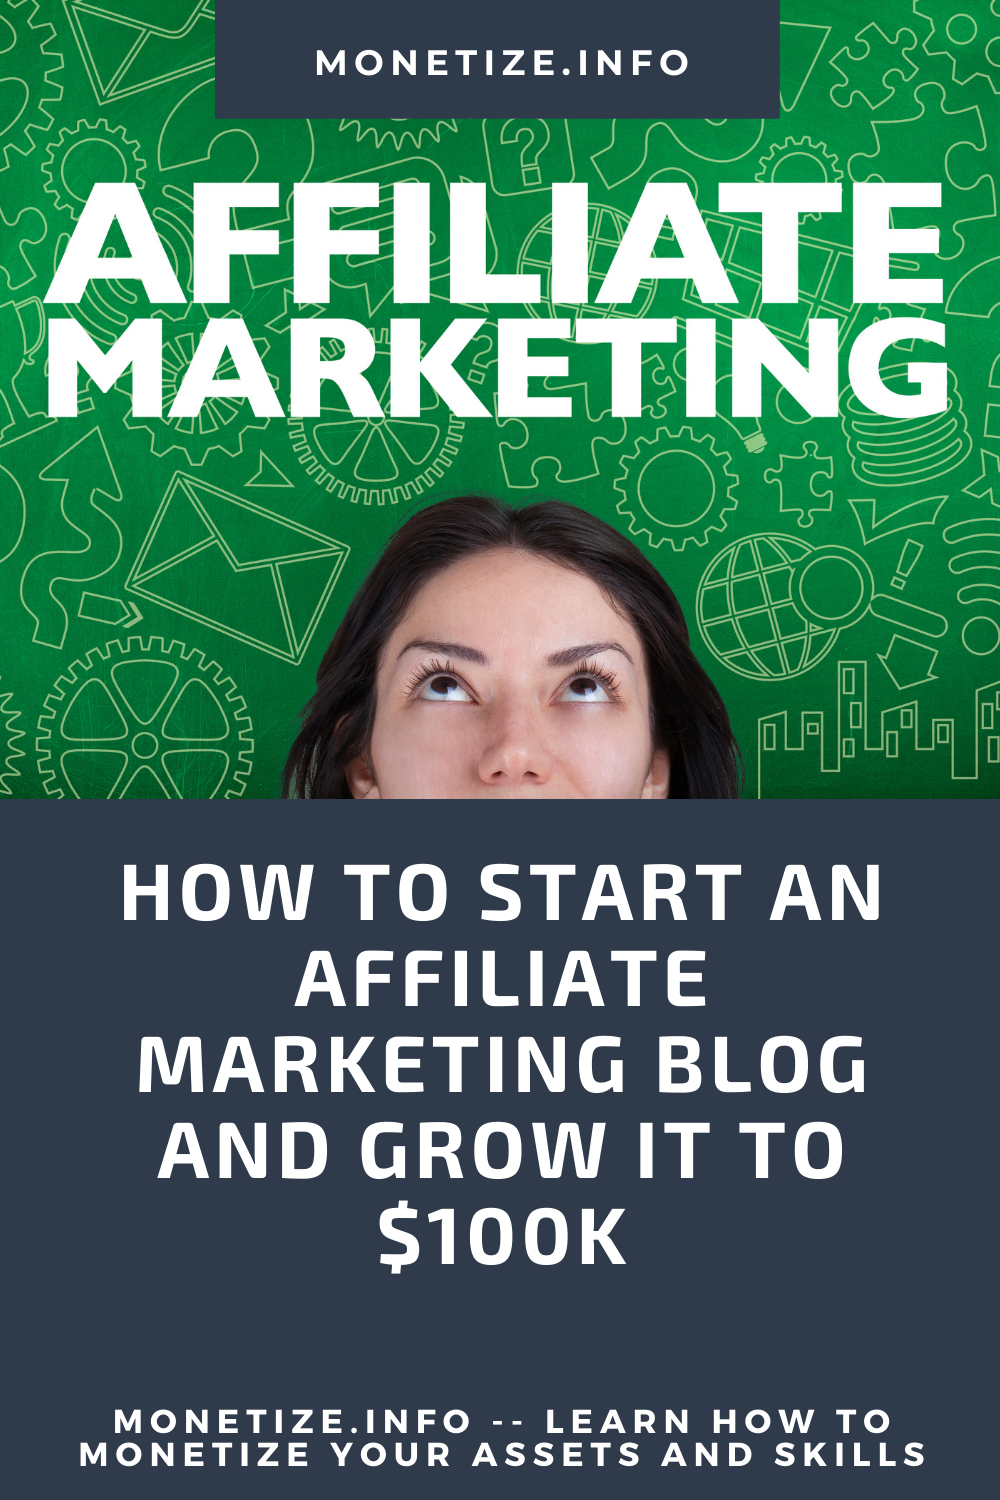 How to Start an Affiliate Marketing Blog and Grow it to $100K - Monetize.info